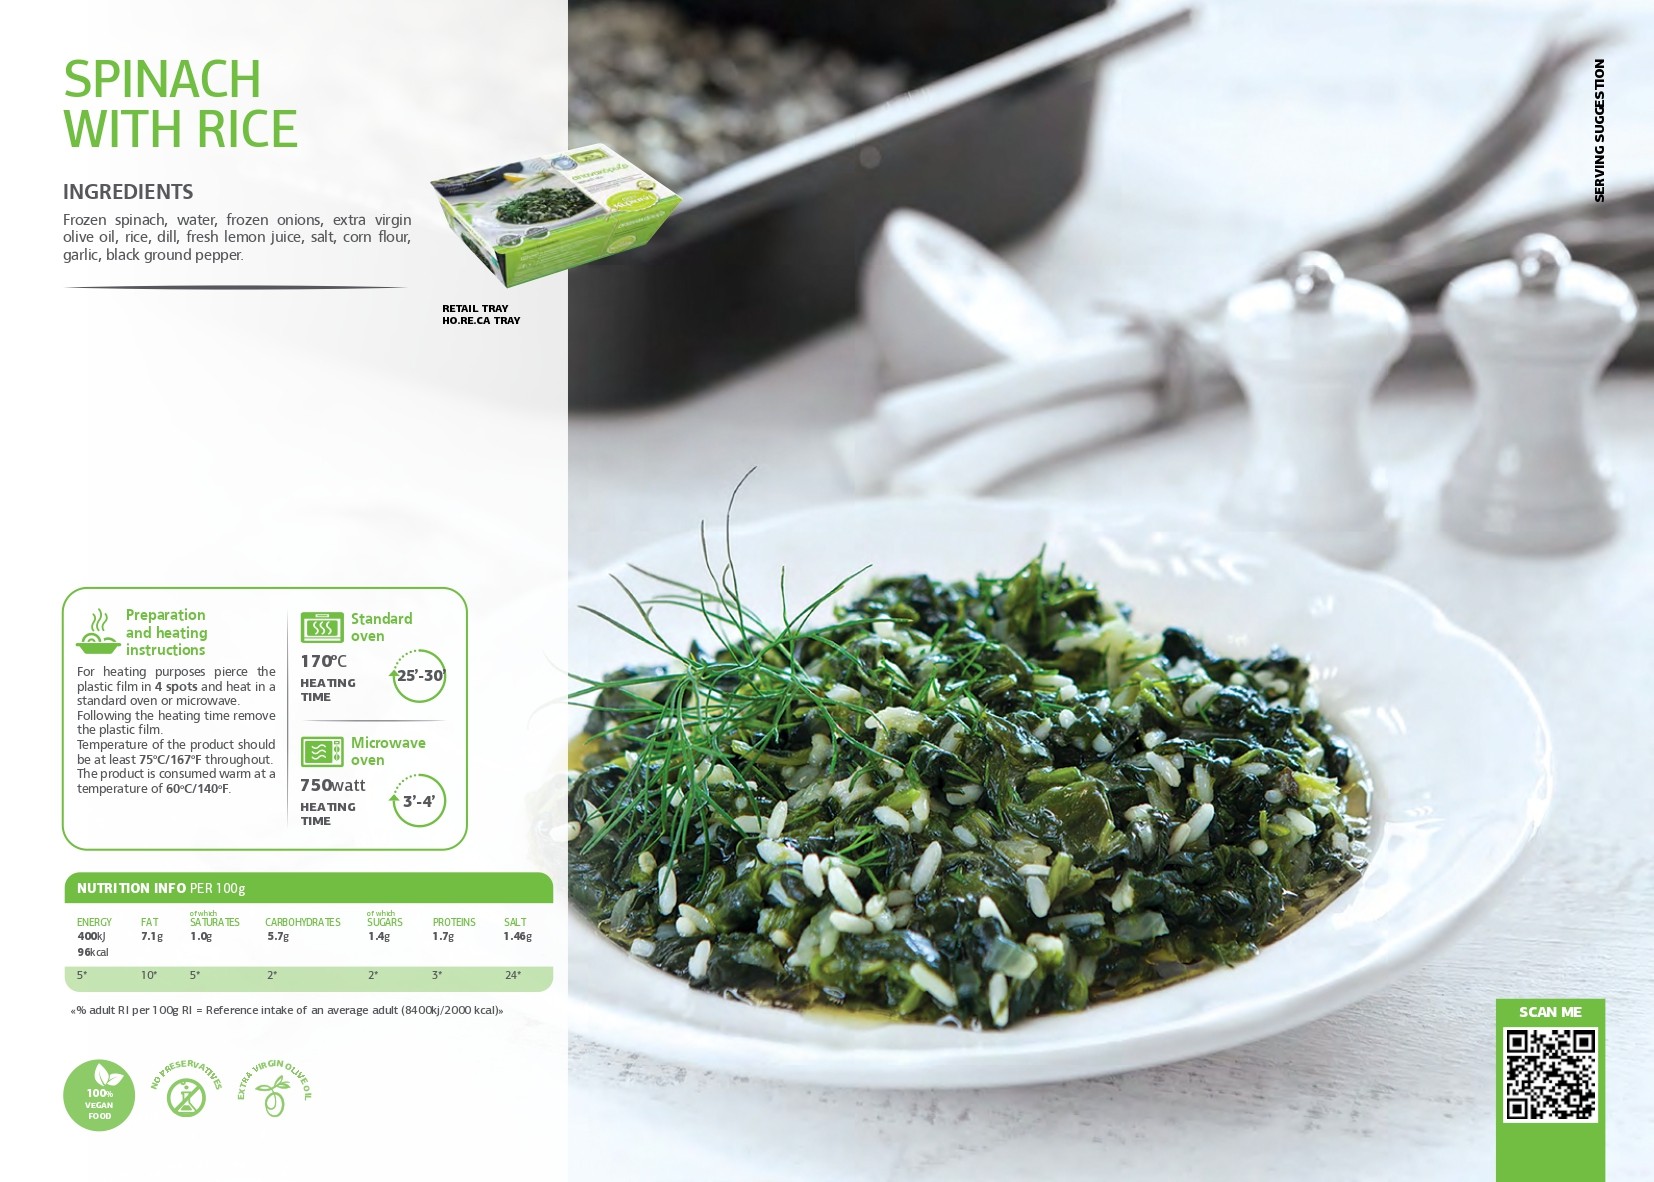 SK - Spinach with rice pdf image